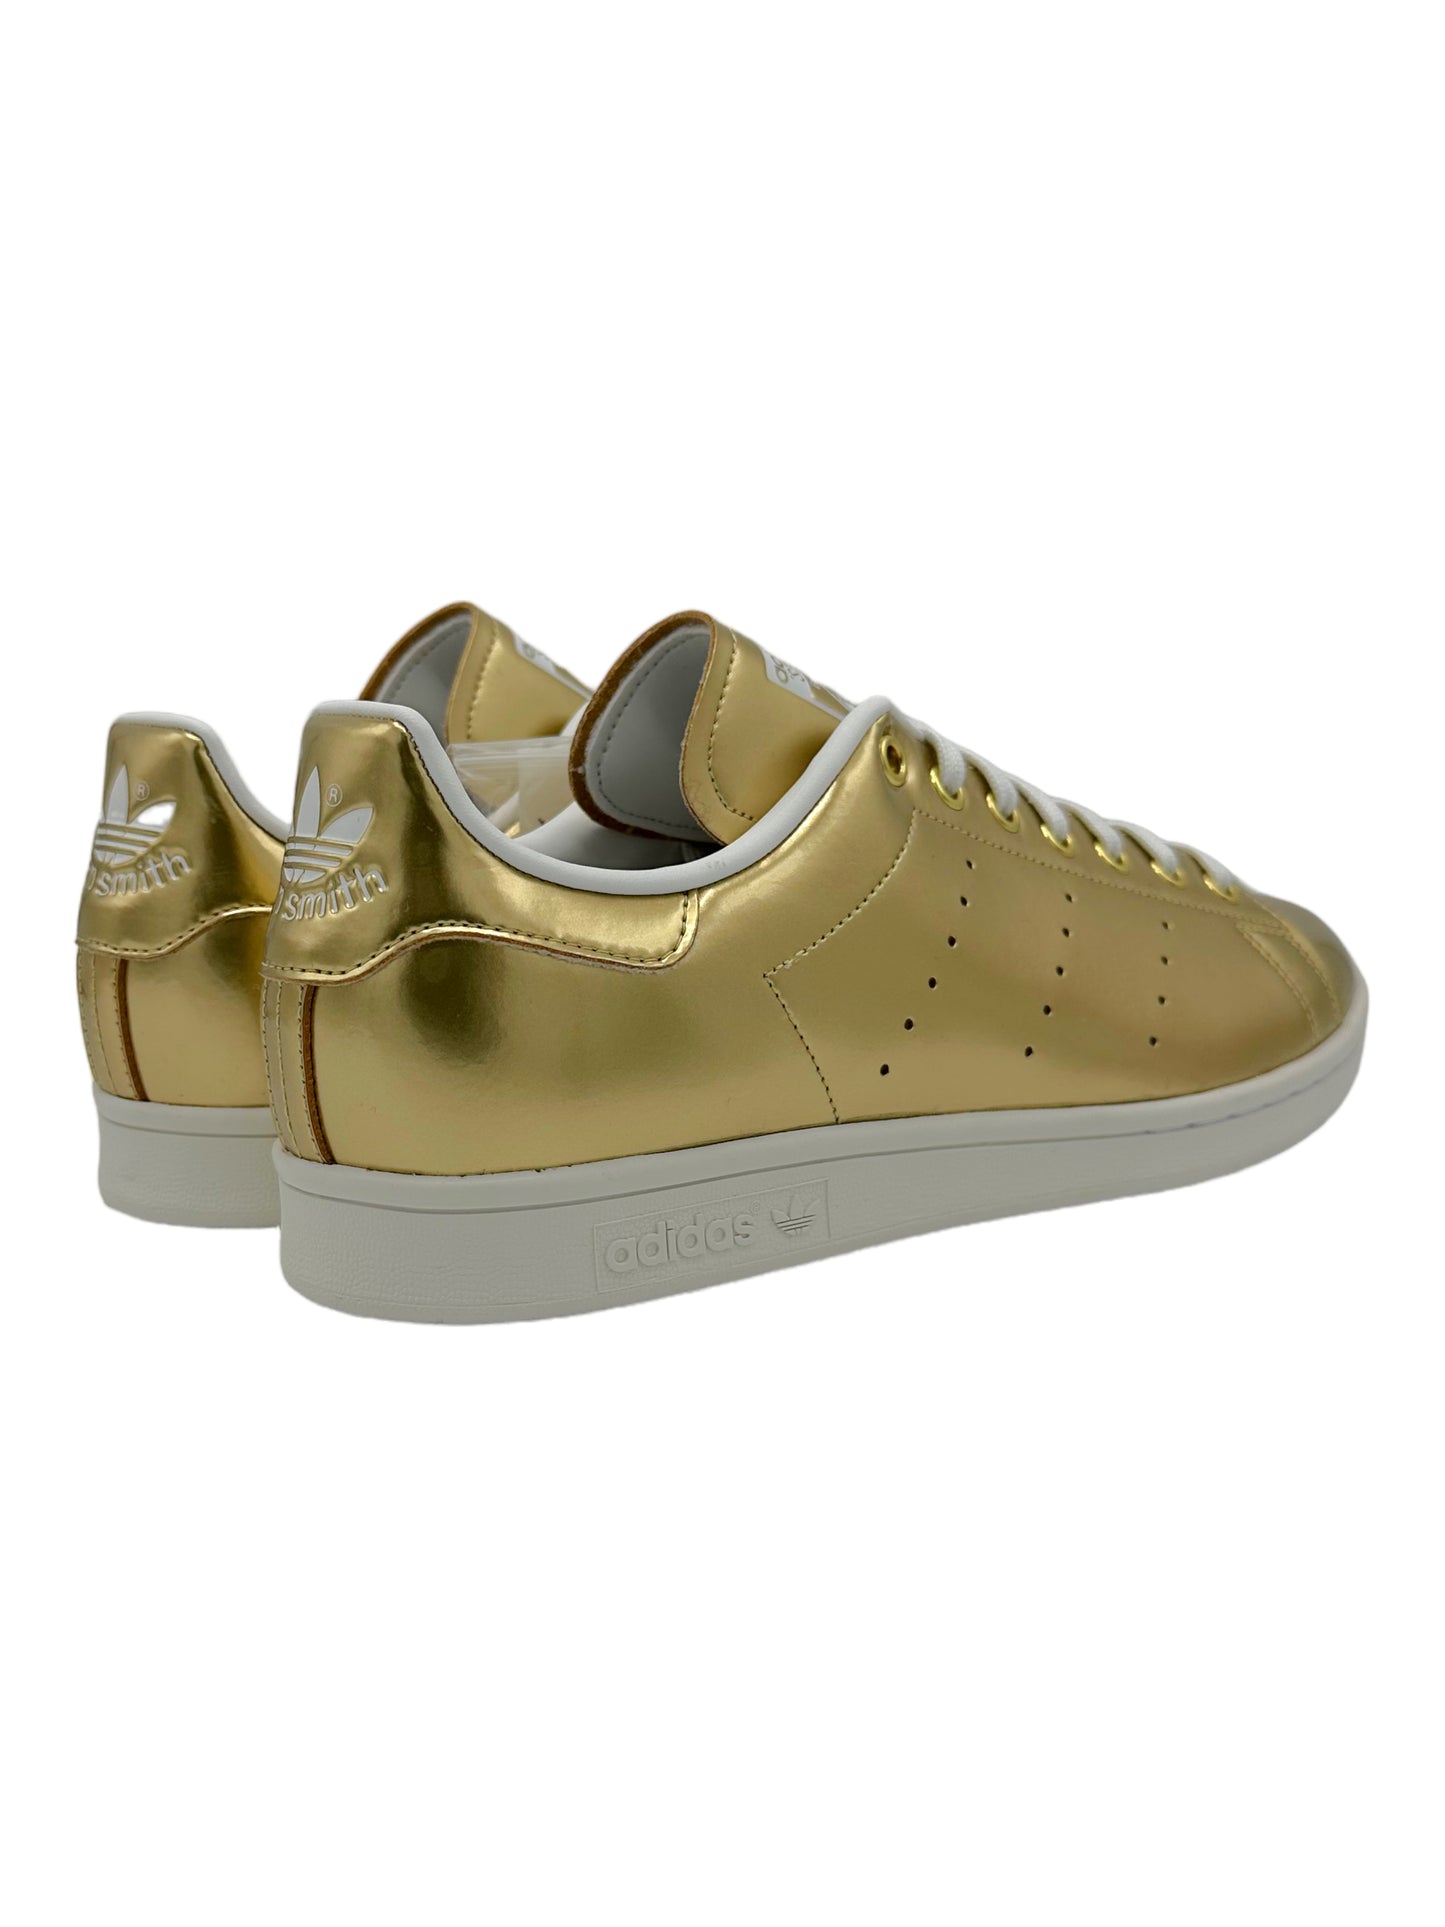 Adidas Stan Smith Metal Gold Metallic Sneakers - Genuine Design Luxury Consignment for Men. New & Pre-Owned Clothing, Shoes, & Accessories. Calgary, Canada